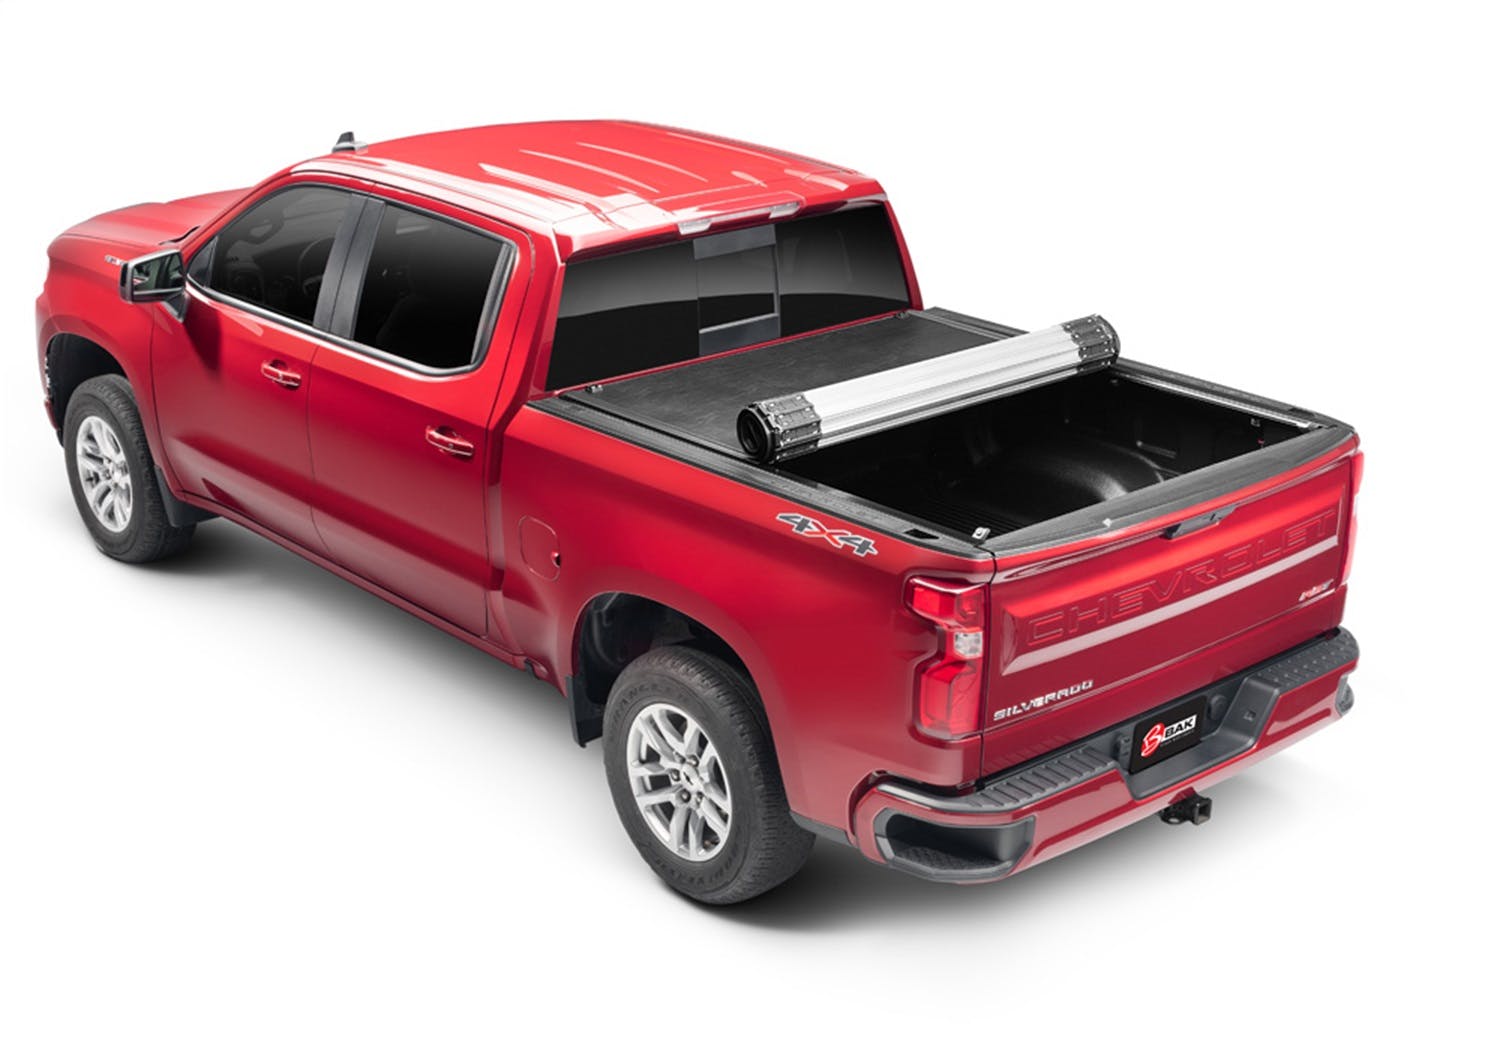 BAK Industries 39132 Revolver X2 Hard Rolling Truck Bed Cover